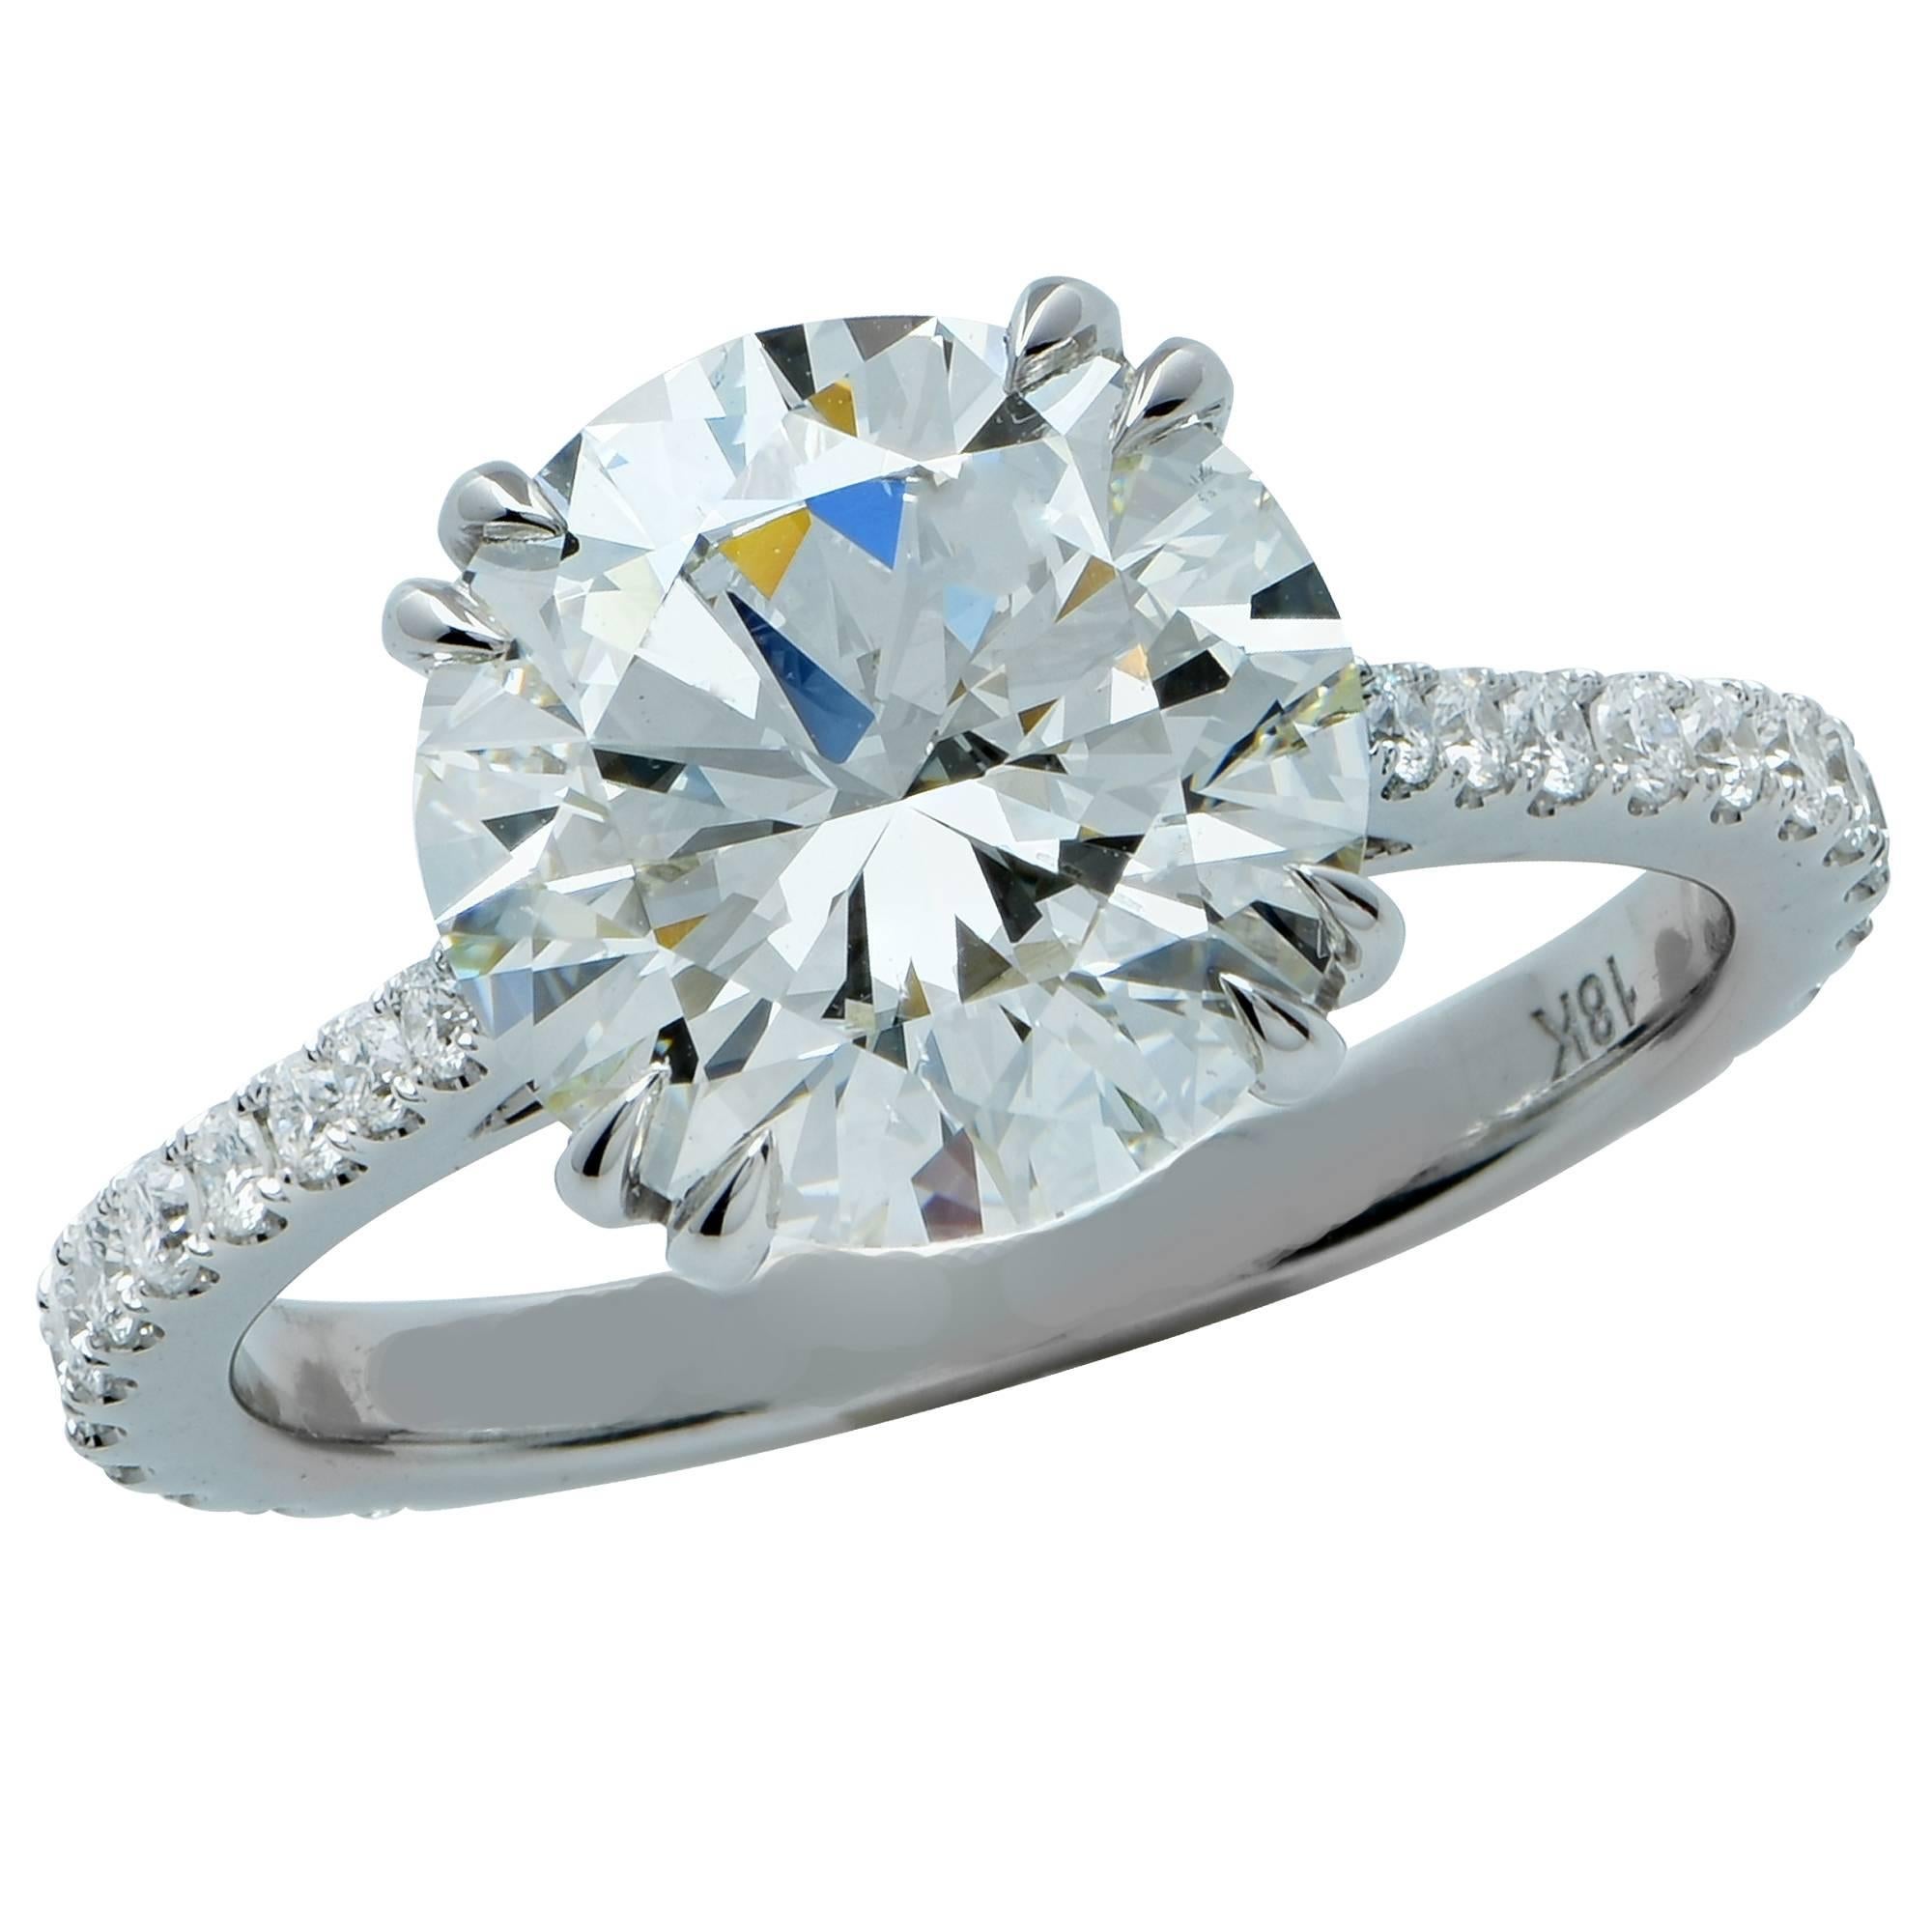 3.70 Carat Total Weight GIA Graded Diamond Engagement Ring